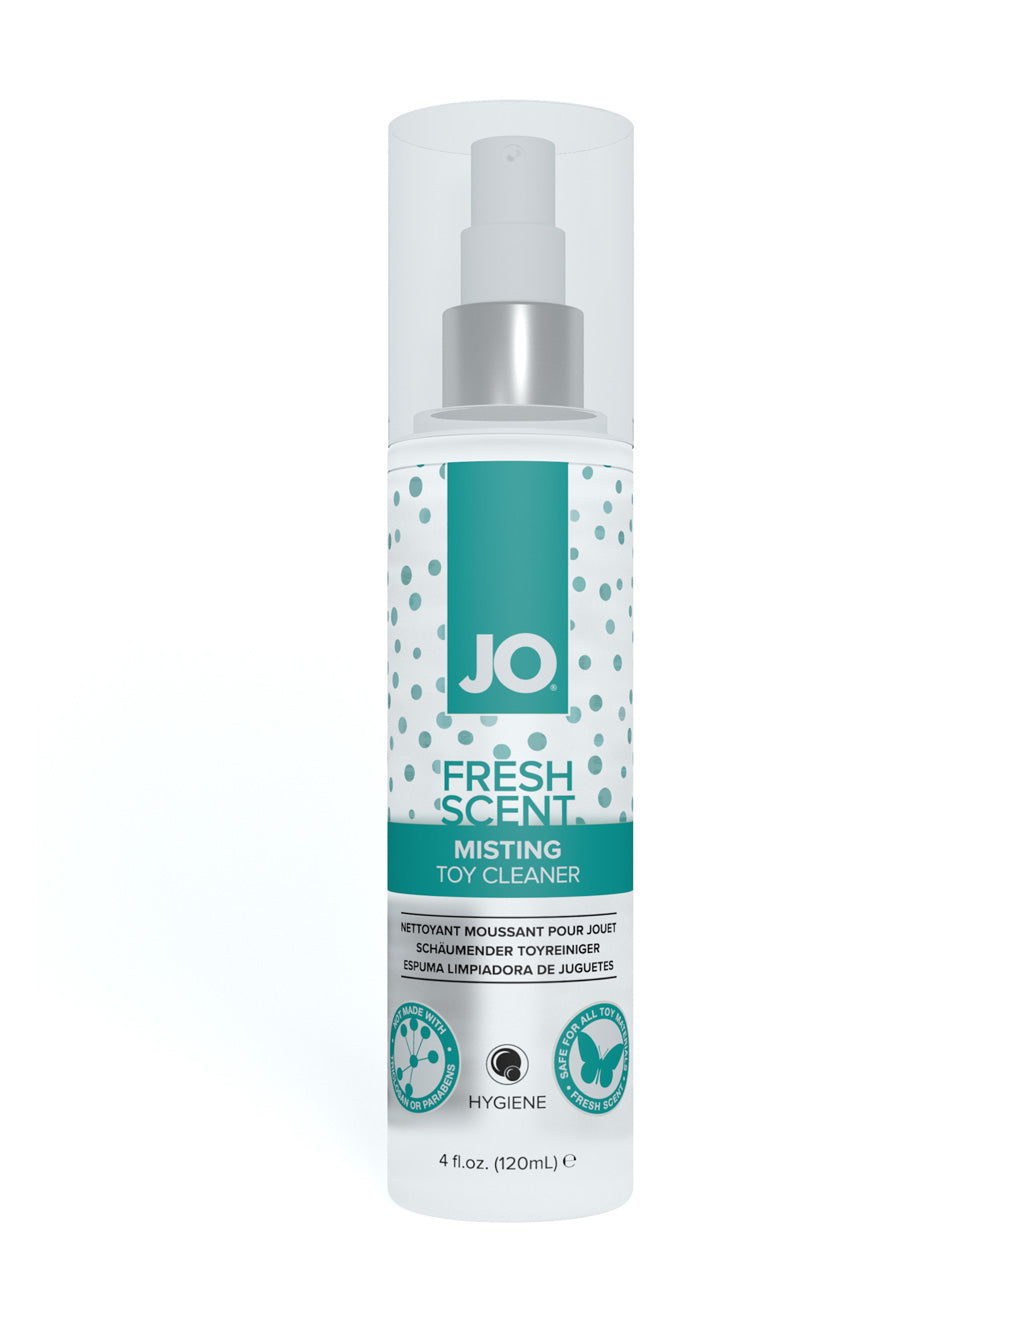 JO Fresh Scent Misting Toy Cleaner Front